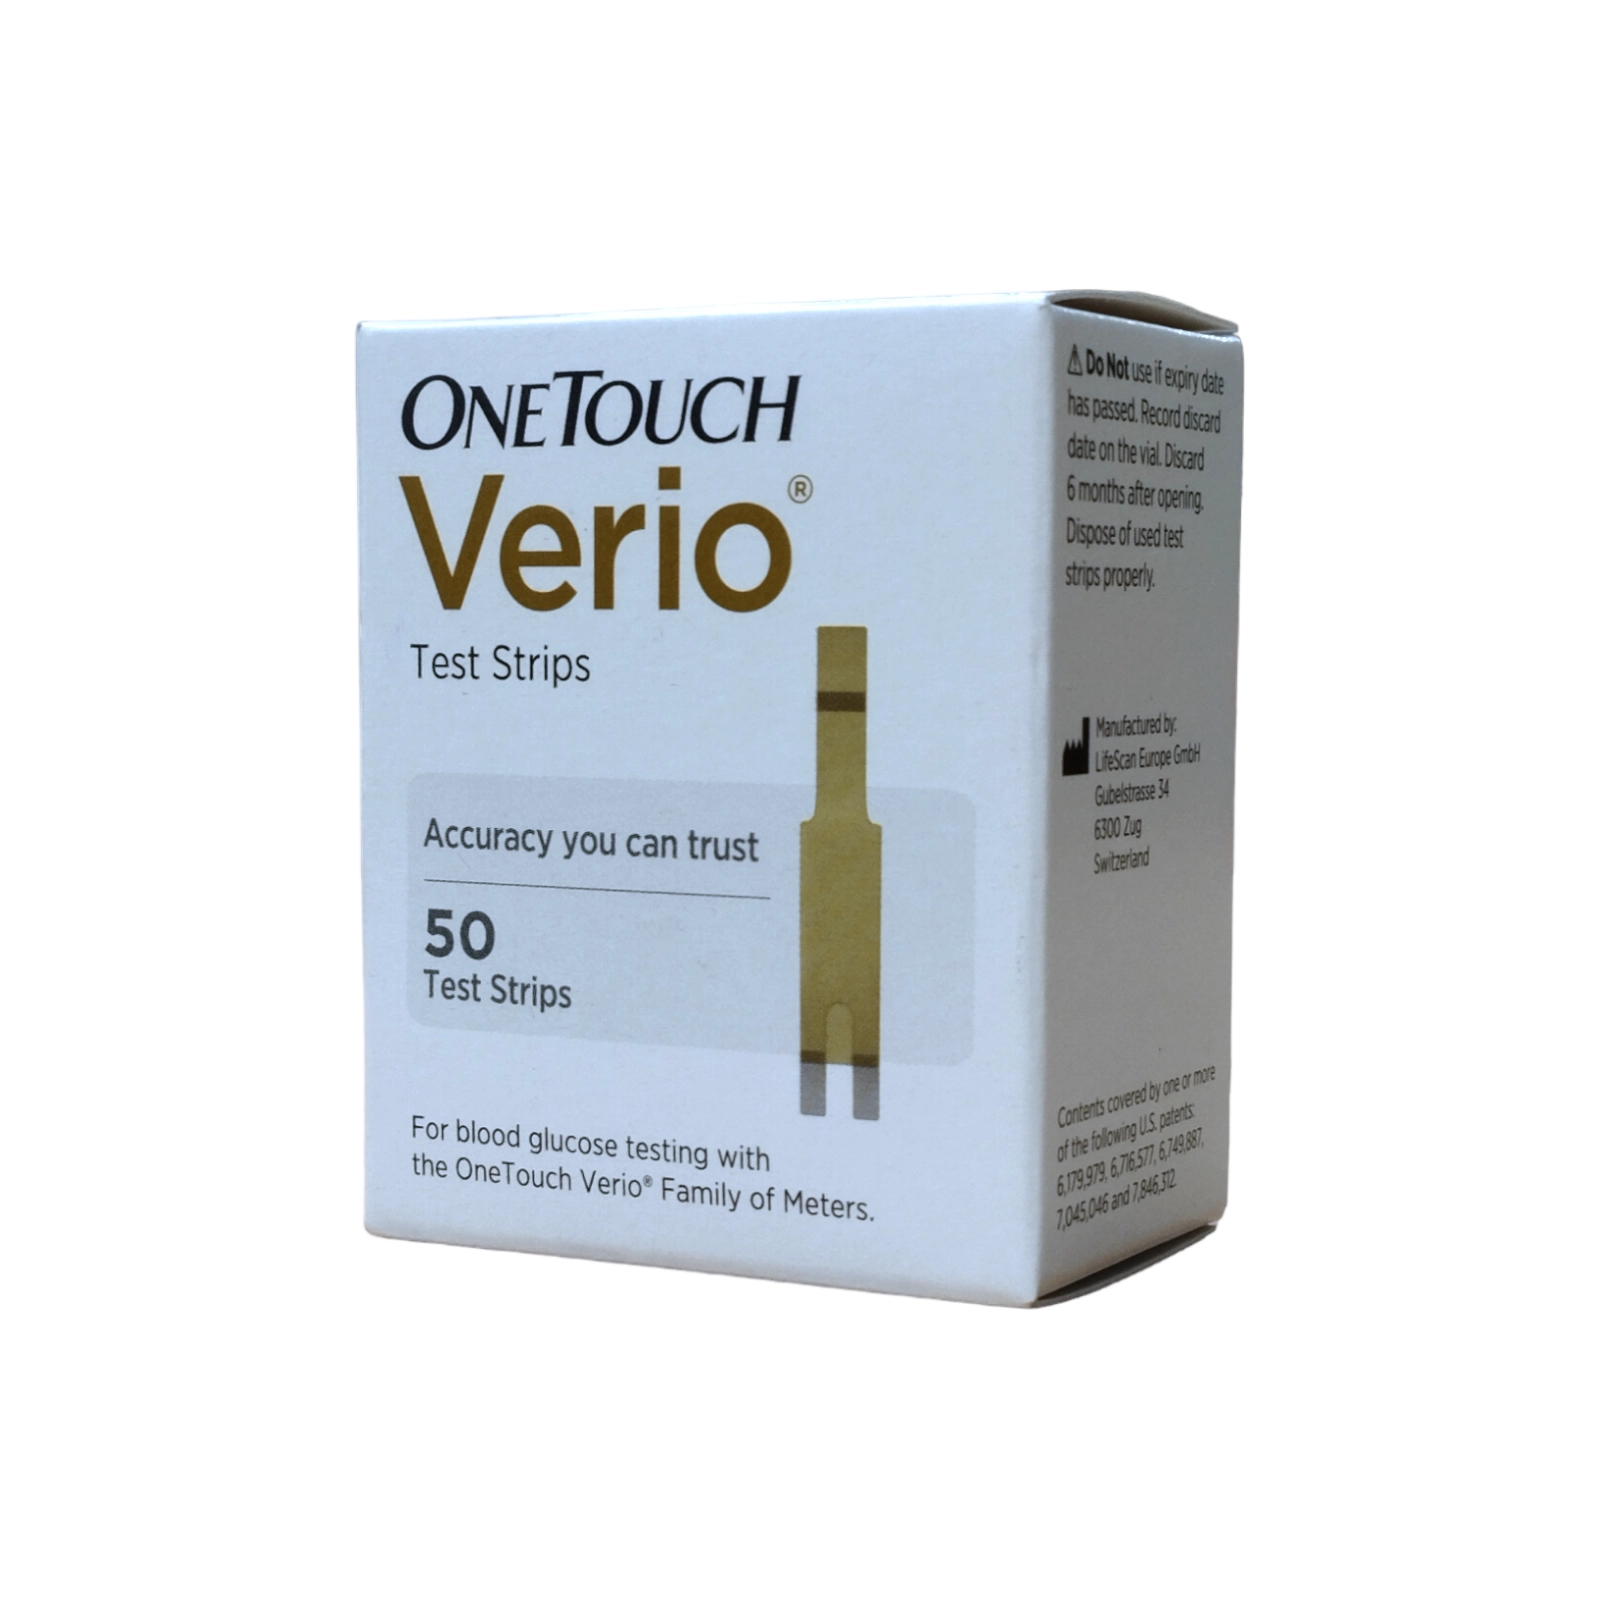 OneTouch Verio Blood Glucose Test strips